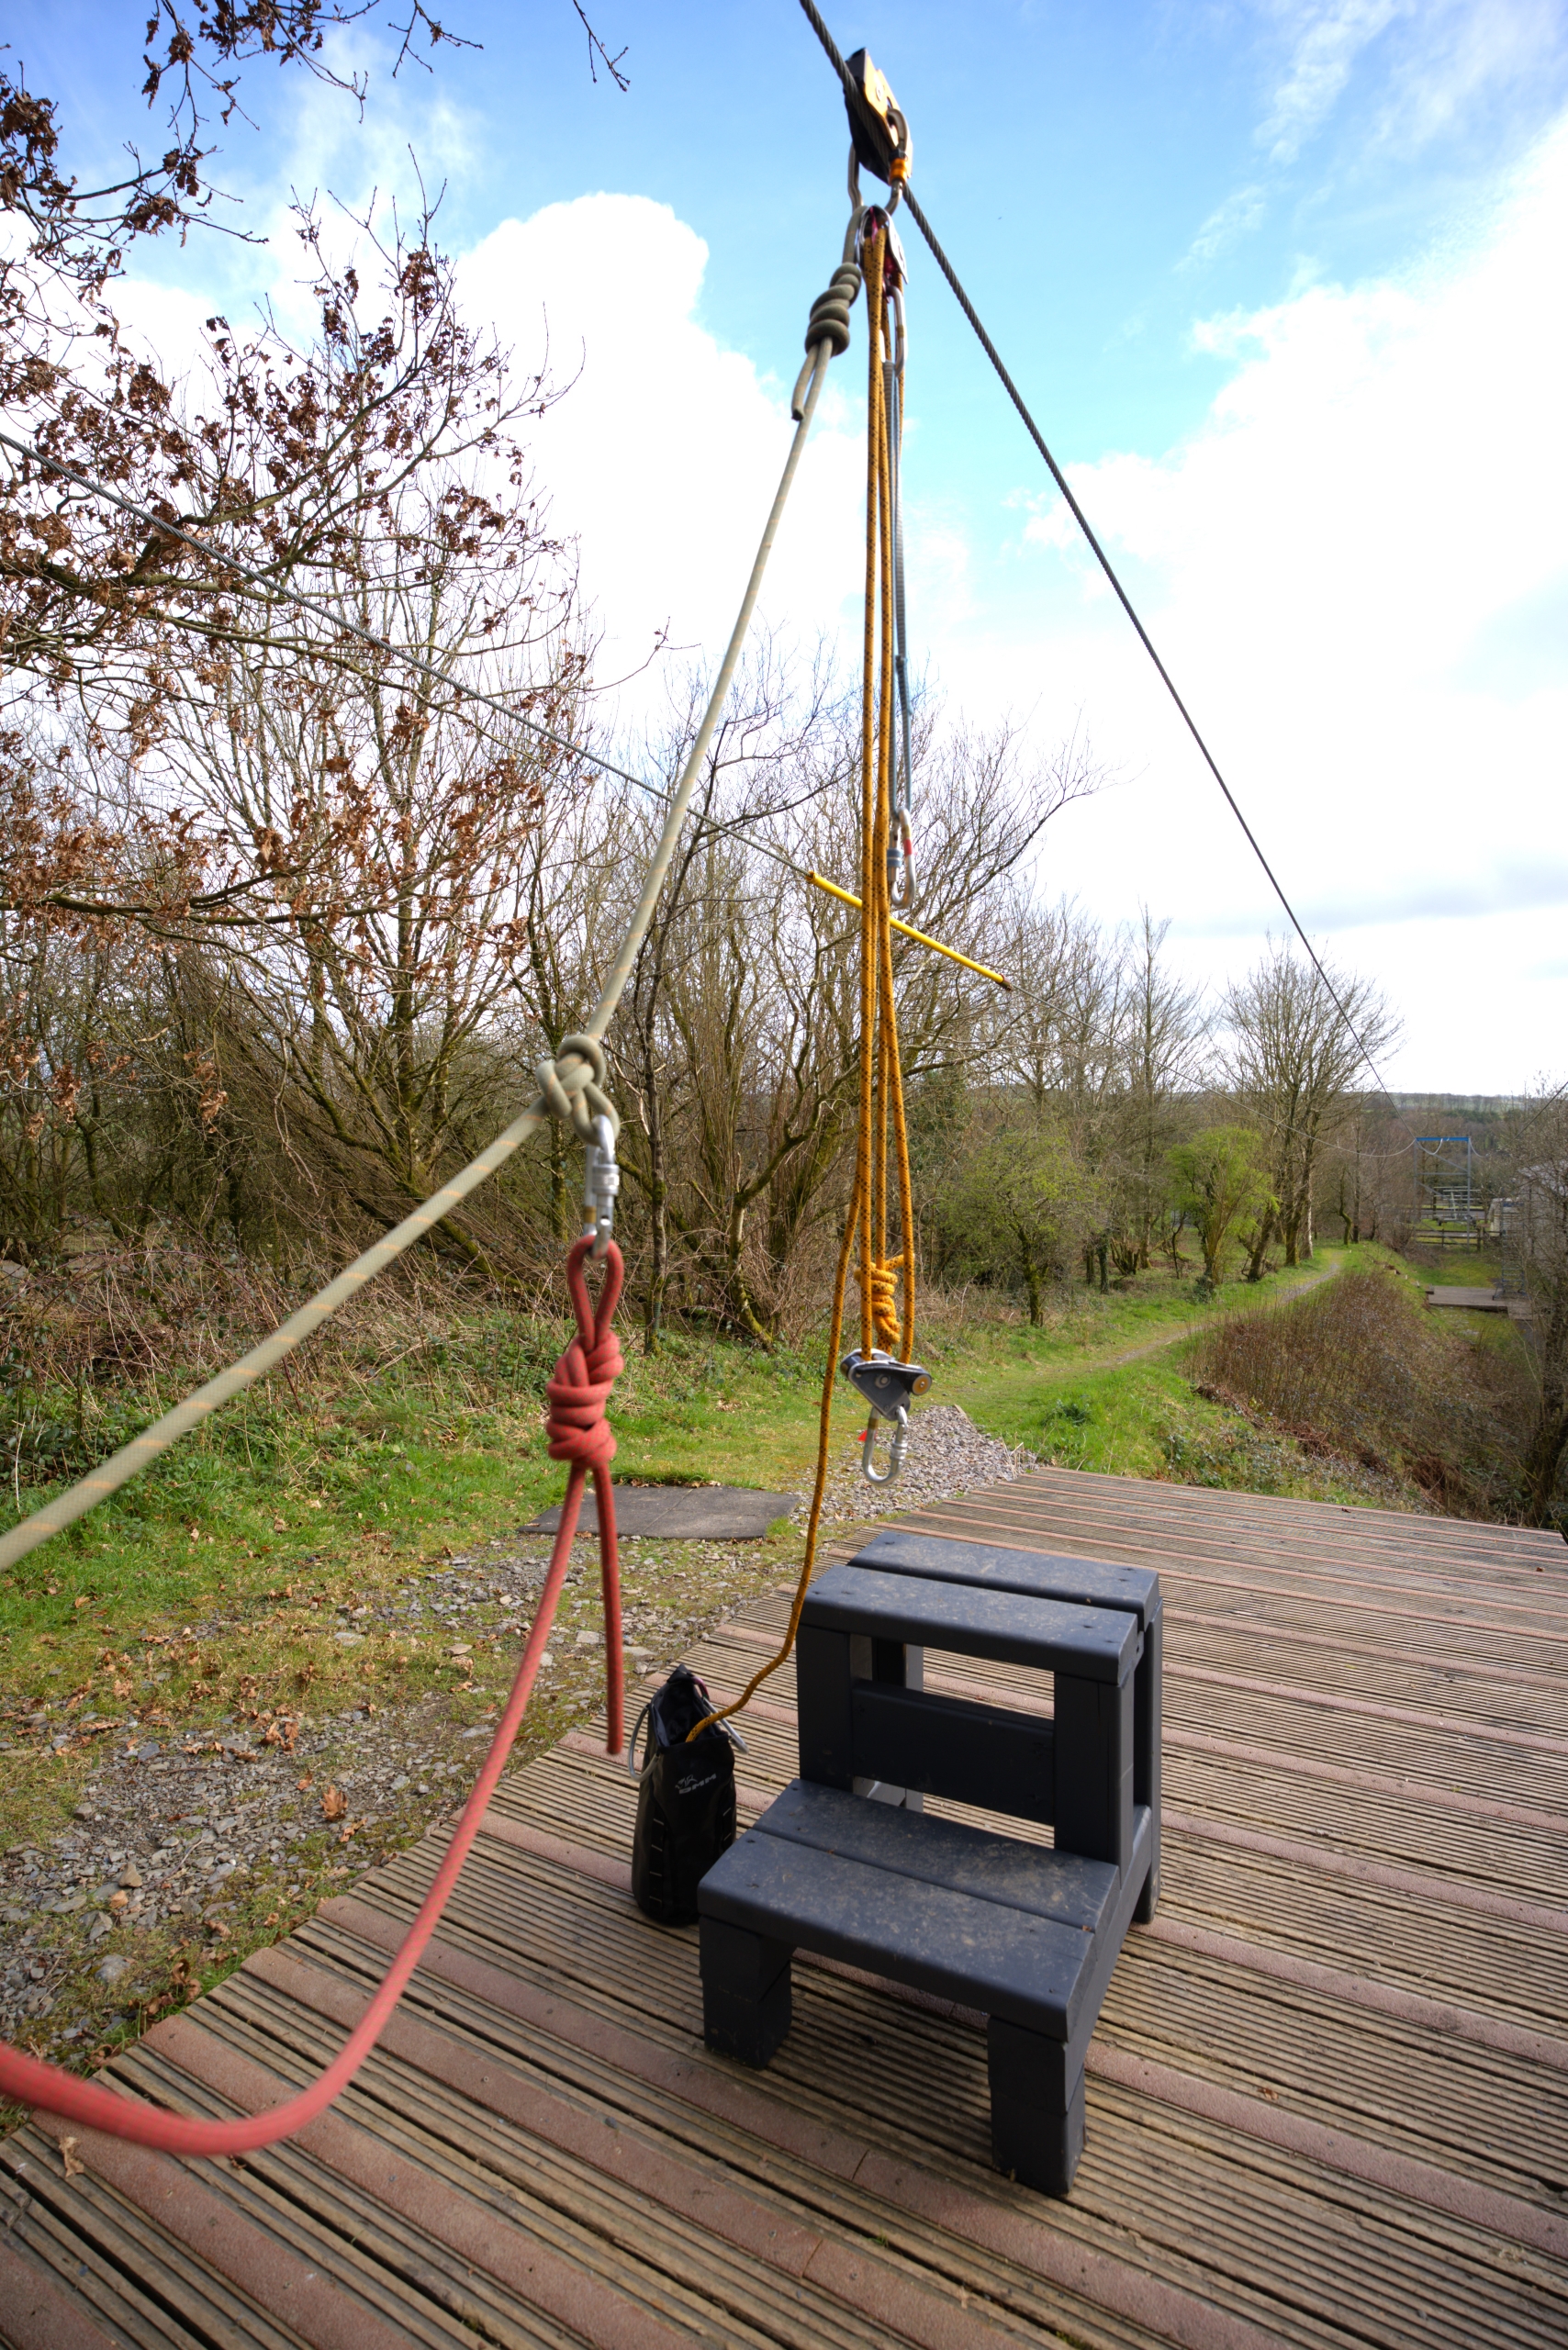 An empty set up for Zipwire activity, including some black steps for guests to climb higher and be attached to the yellow hanging rope and red safety rope.